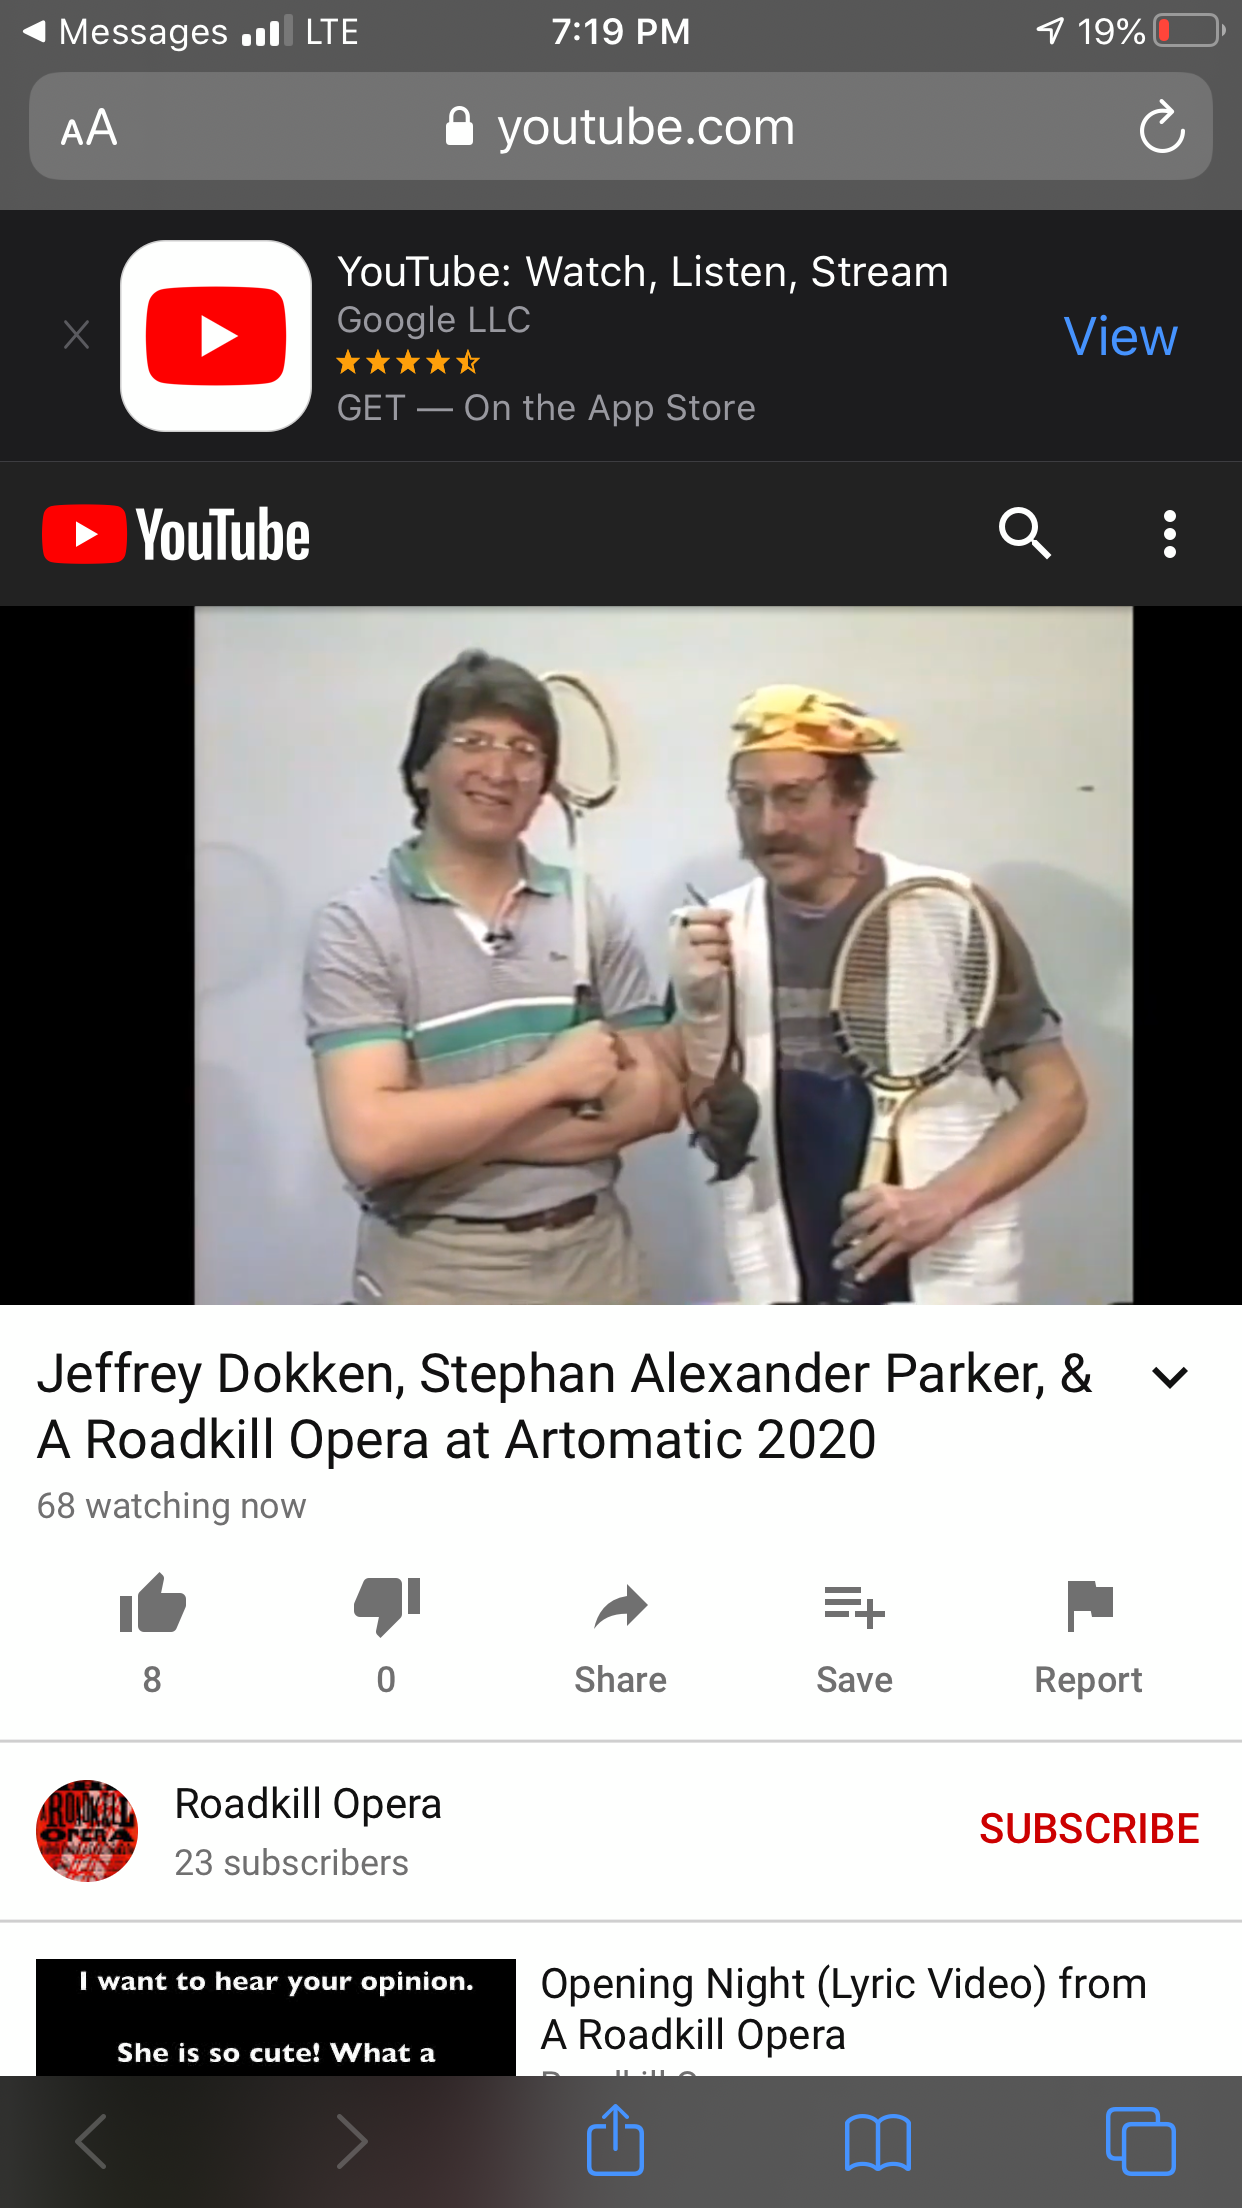 Screenshot of smart phone showing PArker holding a squash racquet, Bachtel holding a tennis racquet and a rubber rat, and text on the screen showing 68 current viewers.